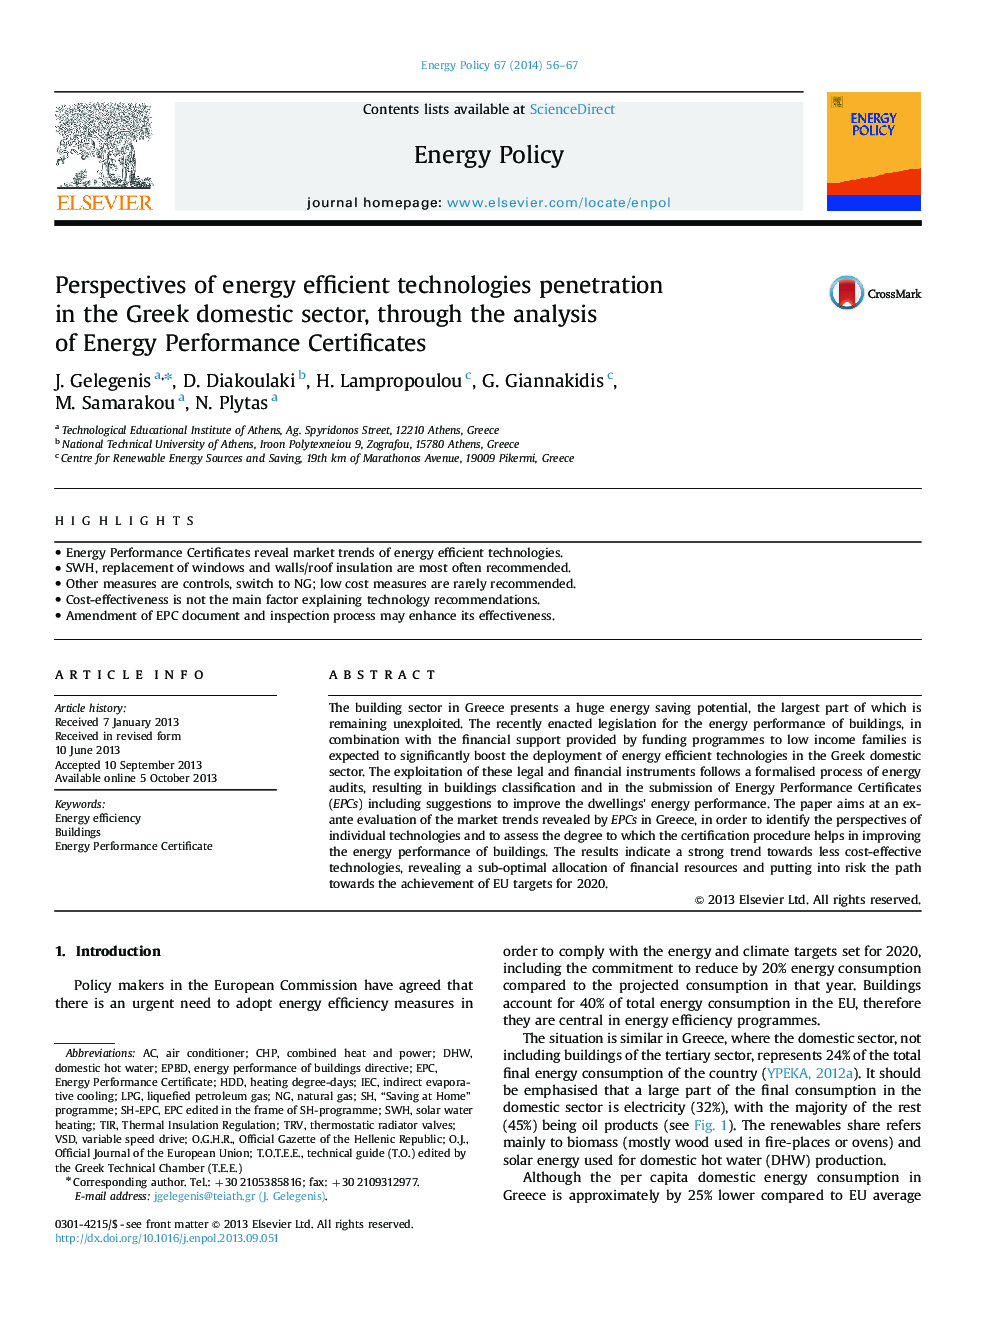 Perspectives of energy efficient technologies penetration in the Greek domestic sector, through the analysis of Energy Performance Certificates